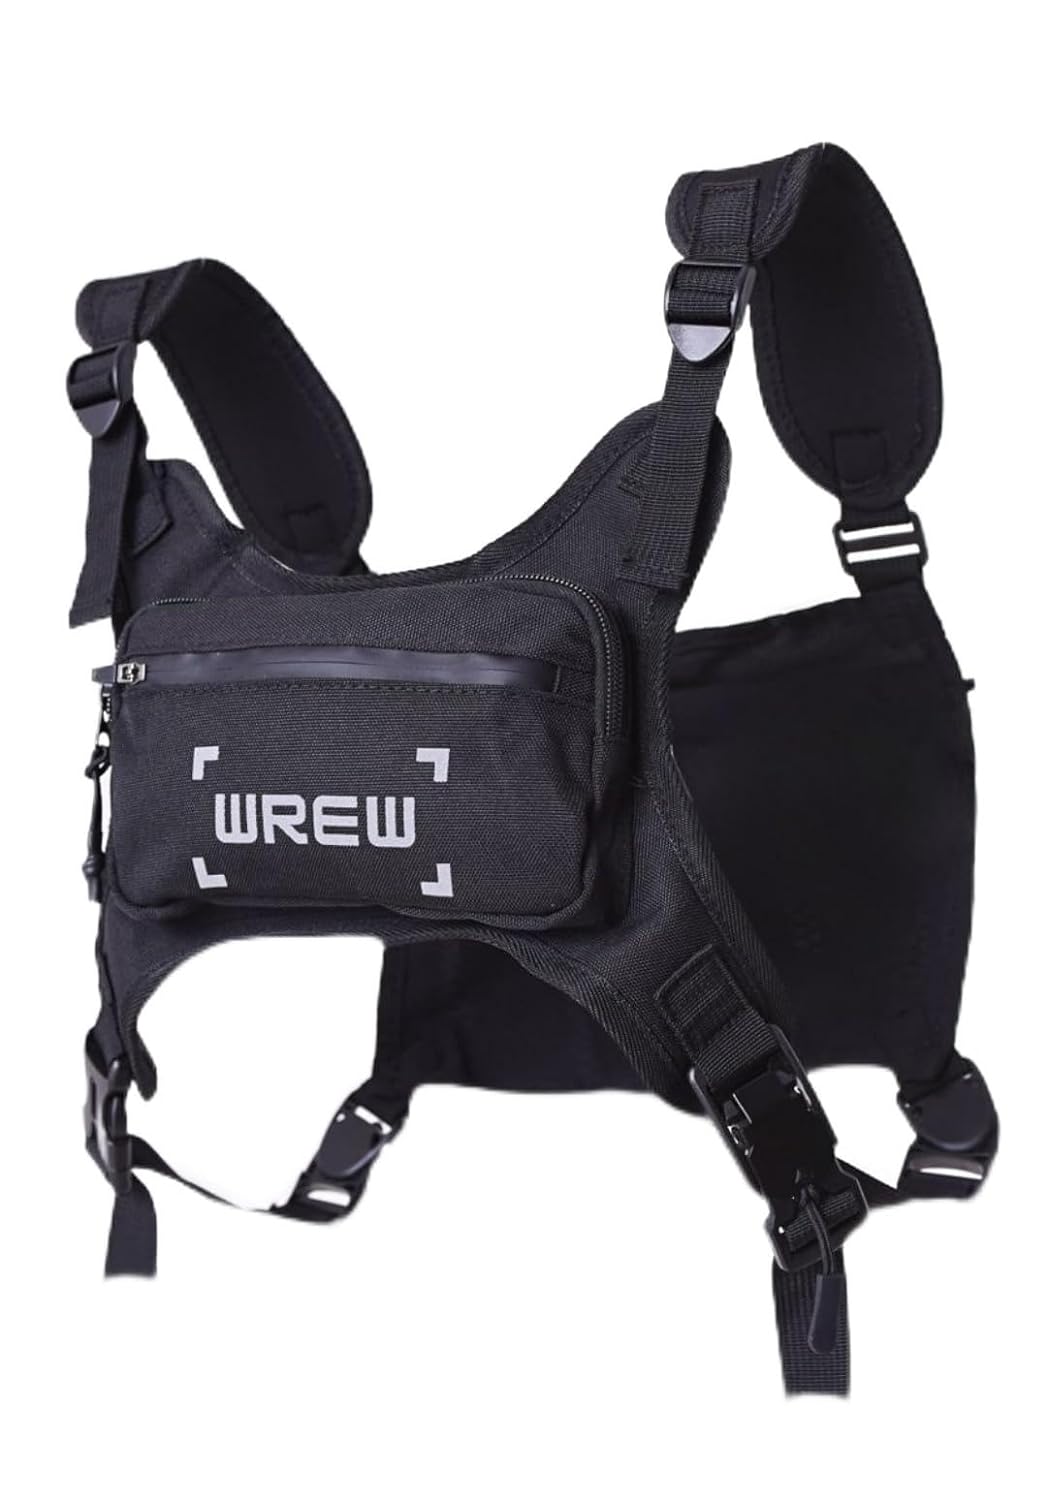 WREW Water Resistant Chest Bag for Men-Minimalist Chest Pack for Workouts, Hiking with Phone Holder Extra and Storage, Adjustable Straps for Easy Fit, Lightweight Running Vest and Backpack (Black)